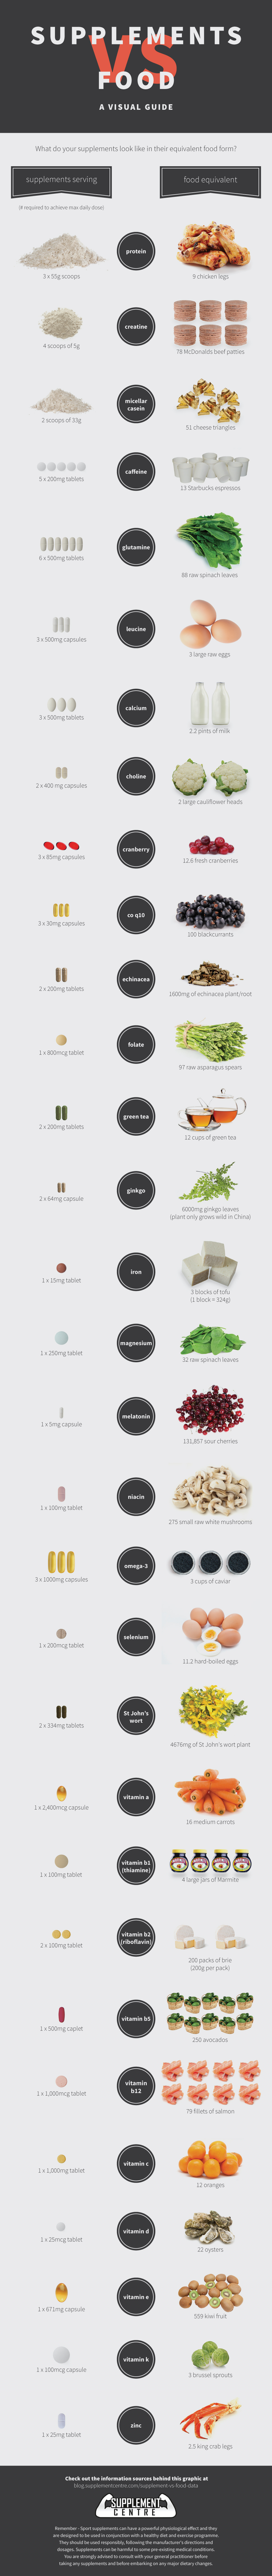 Supplements Vs Food - A Visual Guide